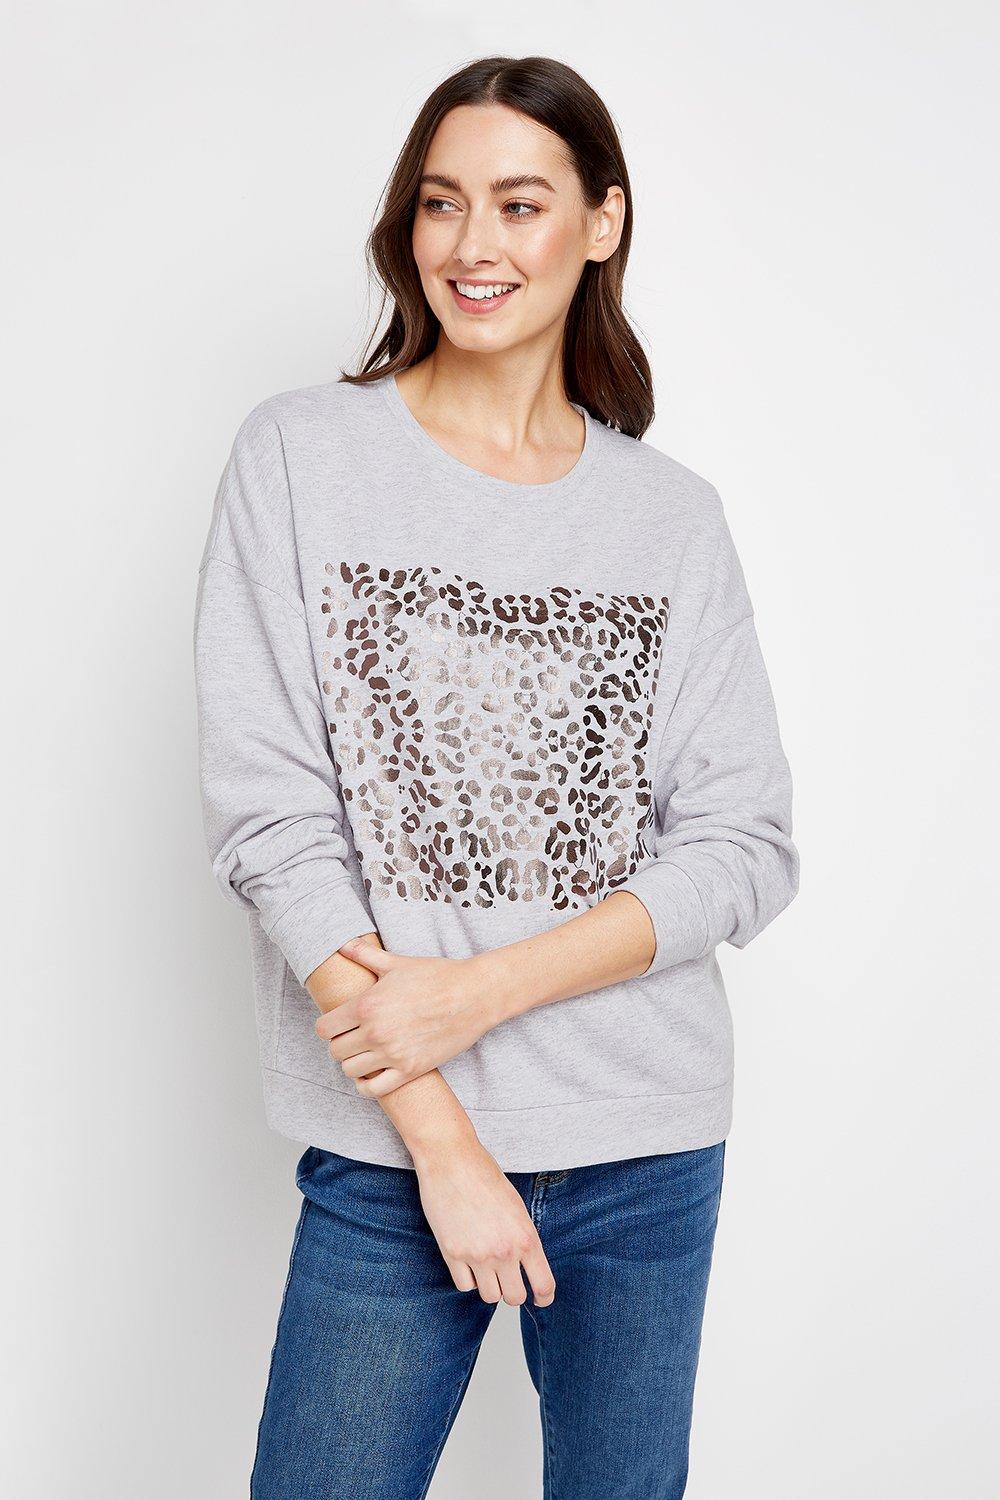 The Cosy Jumper That Has It All - Animal Print, A Touch Of Sparkle, And Super Cosy Feel. A Relaxed Fit And Laid-Back Hue Will Have You Wearing This On-Repeat, Just Team With Faux Leather Leggings And Chunk Ankle Boots To Complete The Look.&Nbsp;  Jumper R